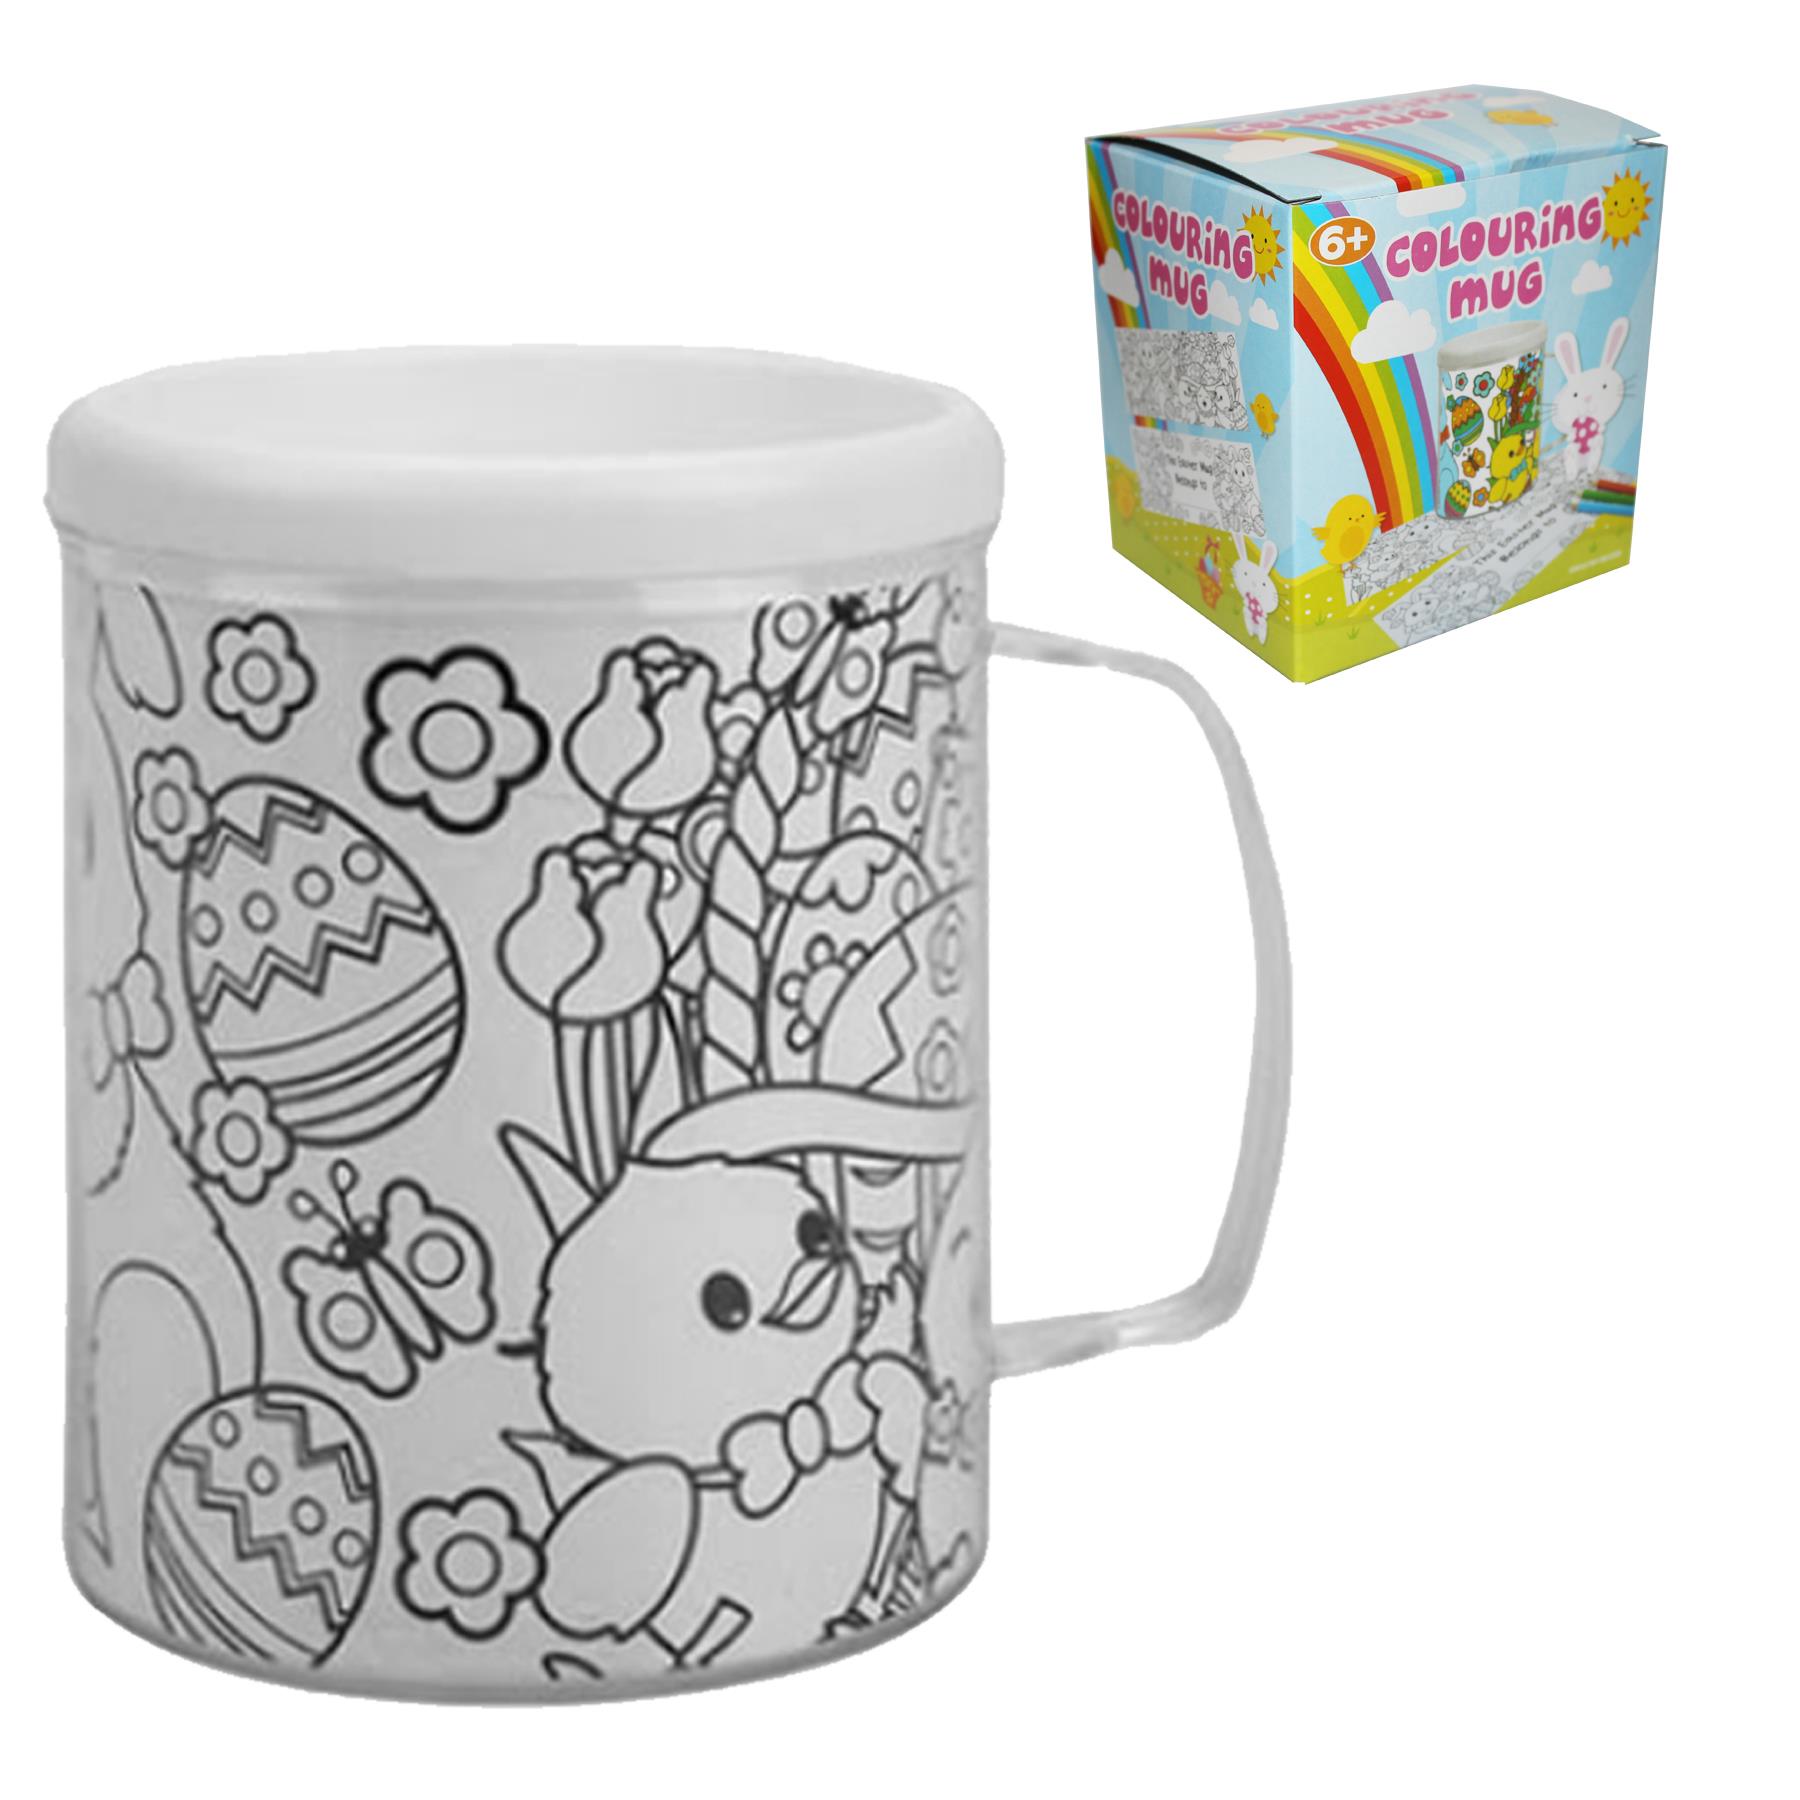 Easter Arts and Crafts Children Activities - Colour your own Mug / Cup Age 6+